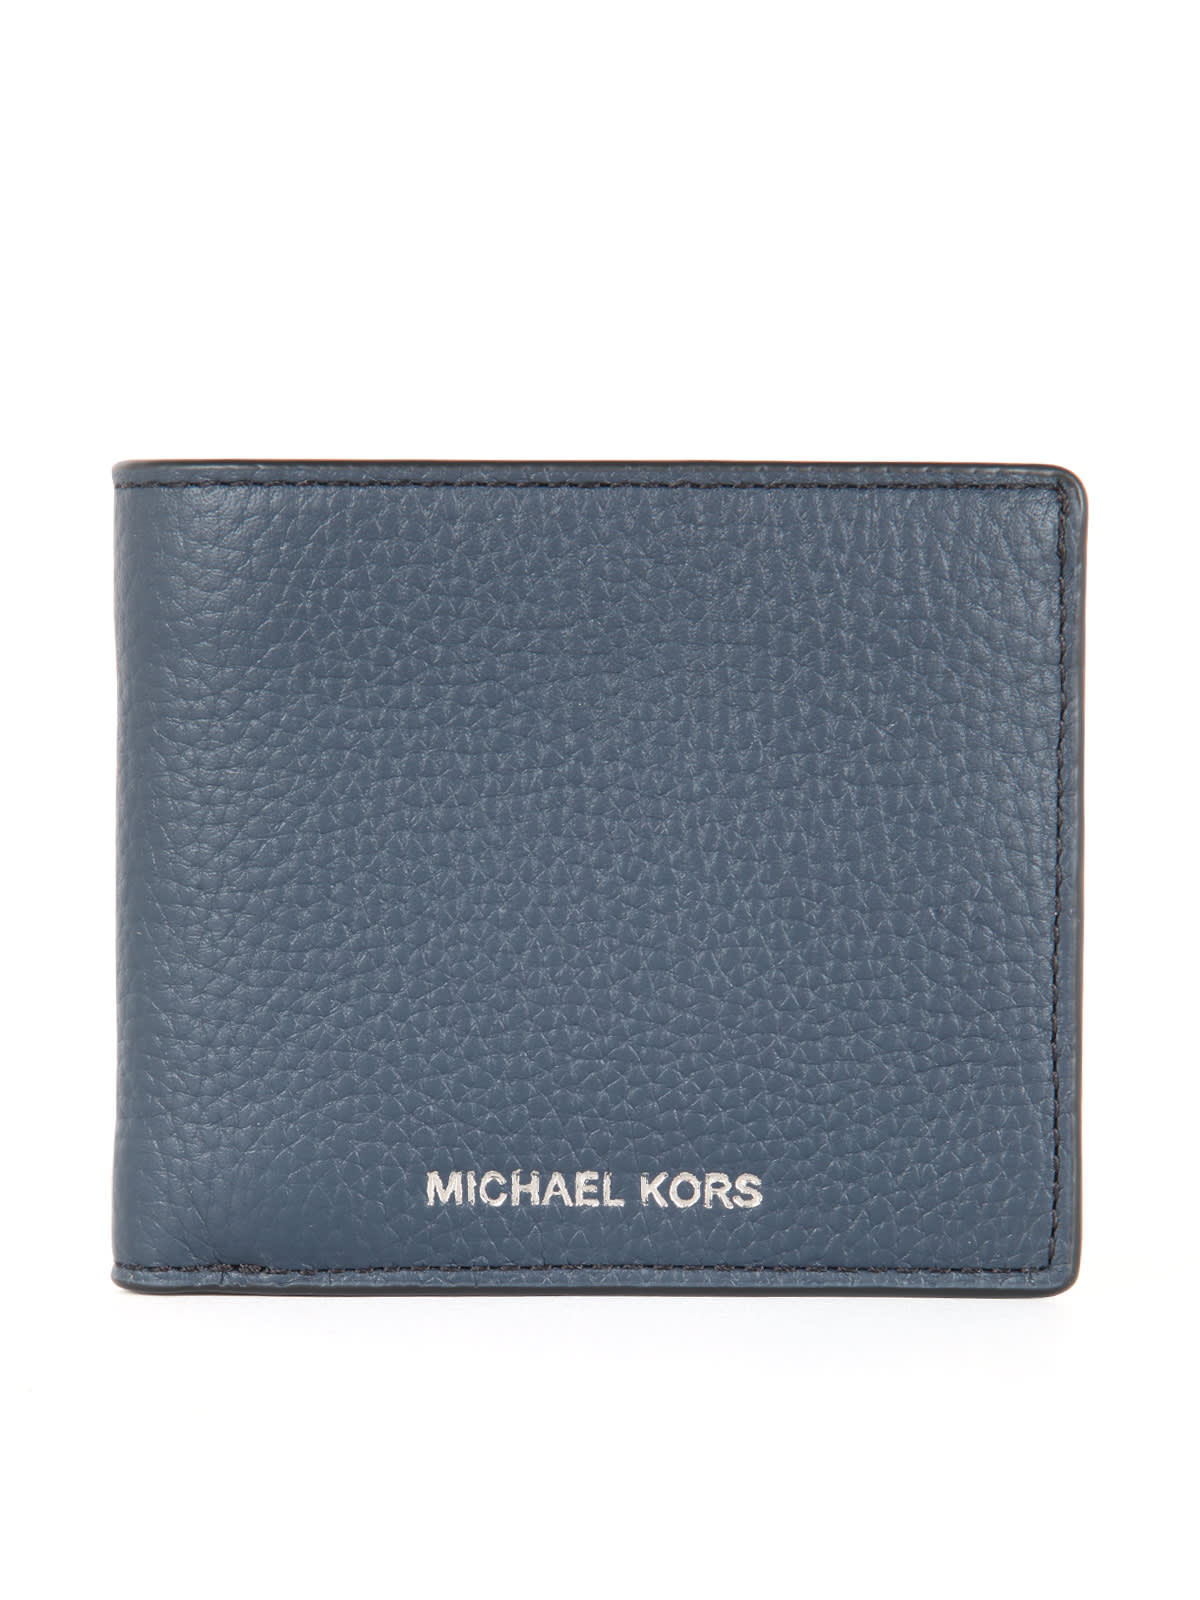 Michael Kors Billfold With Coin Pocket In Navy